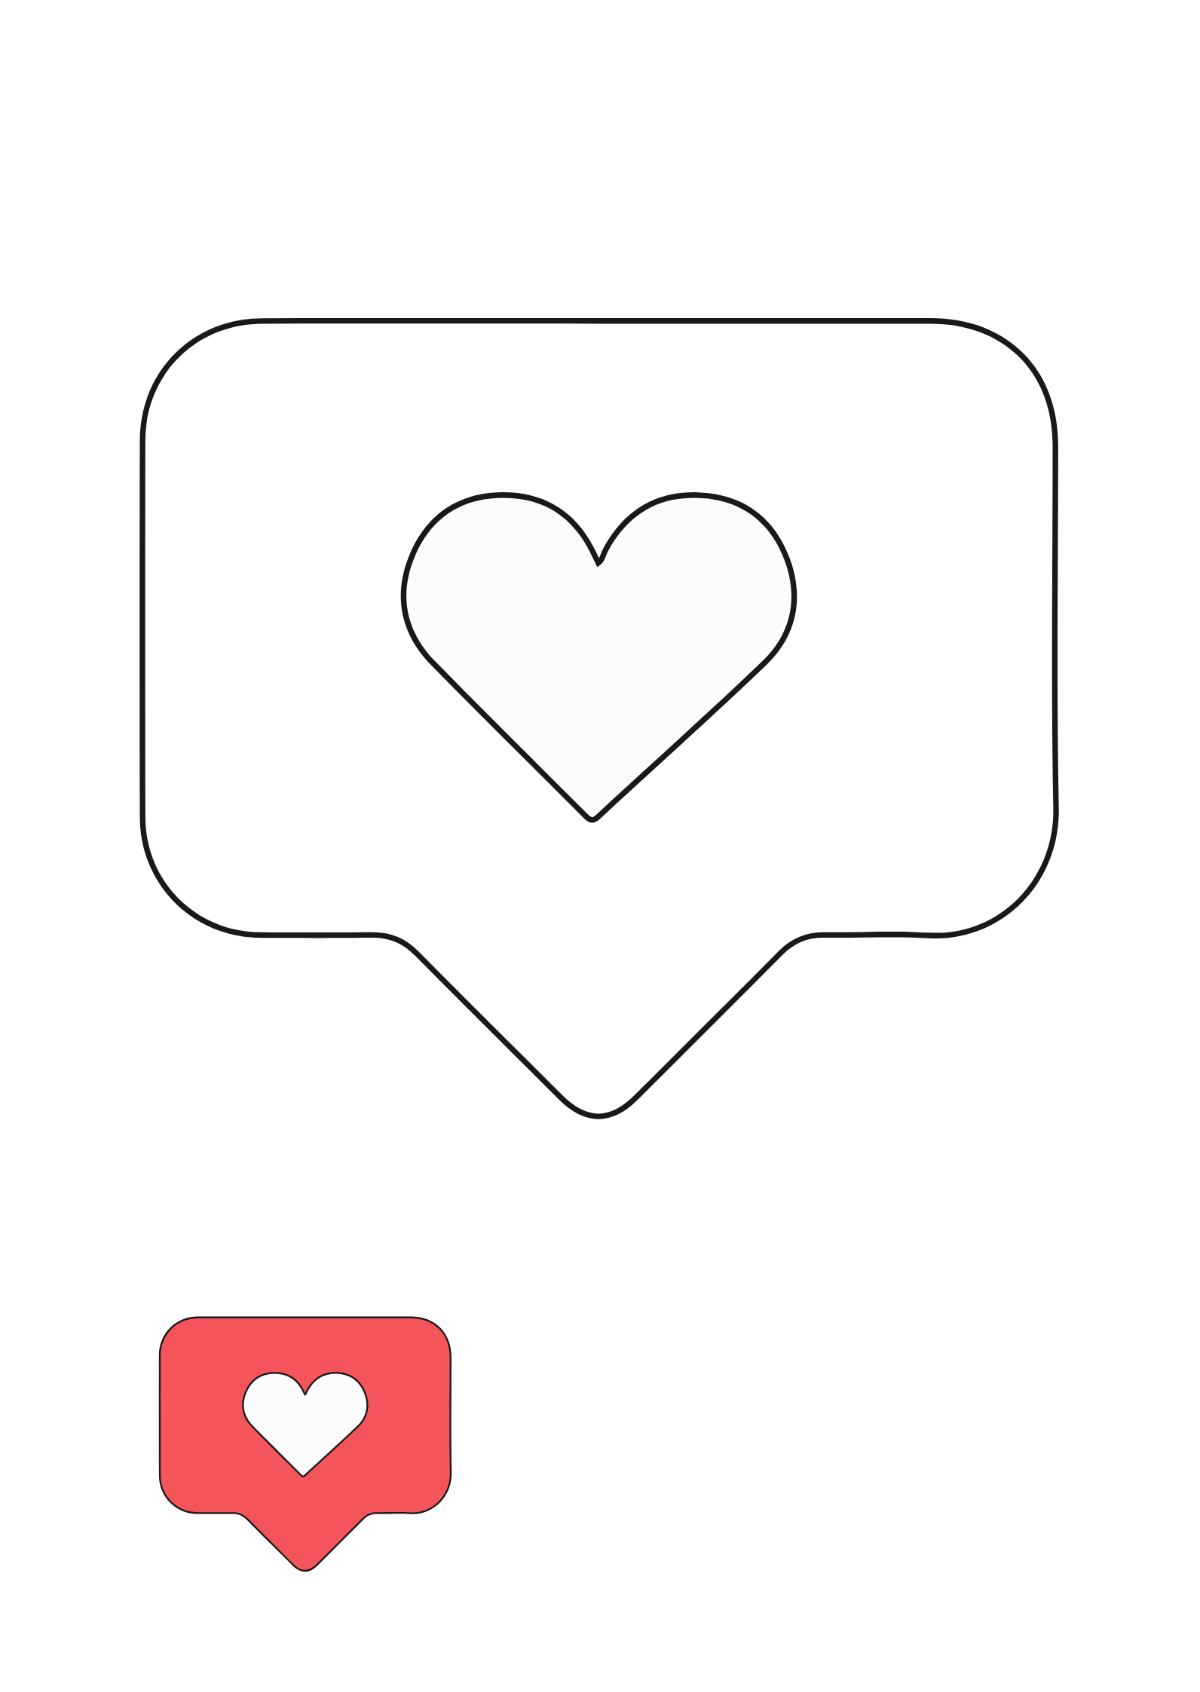 Instagram Heart Coloring Page